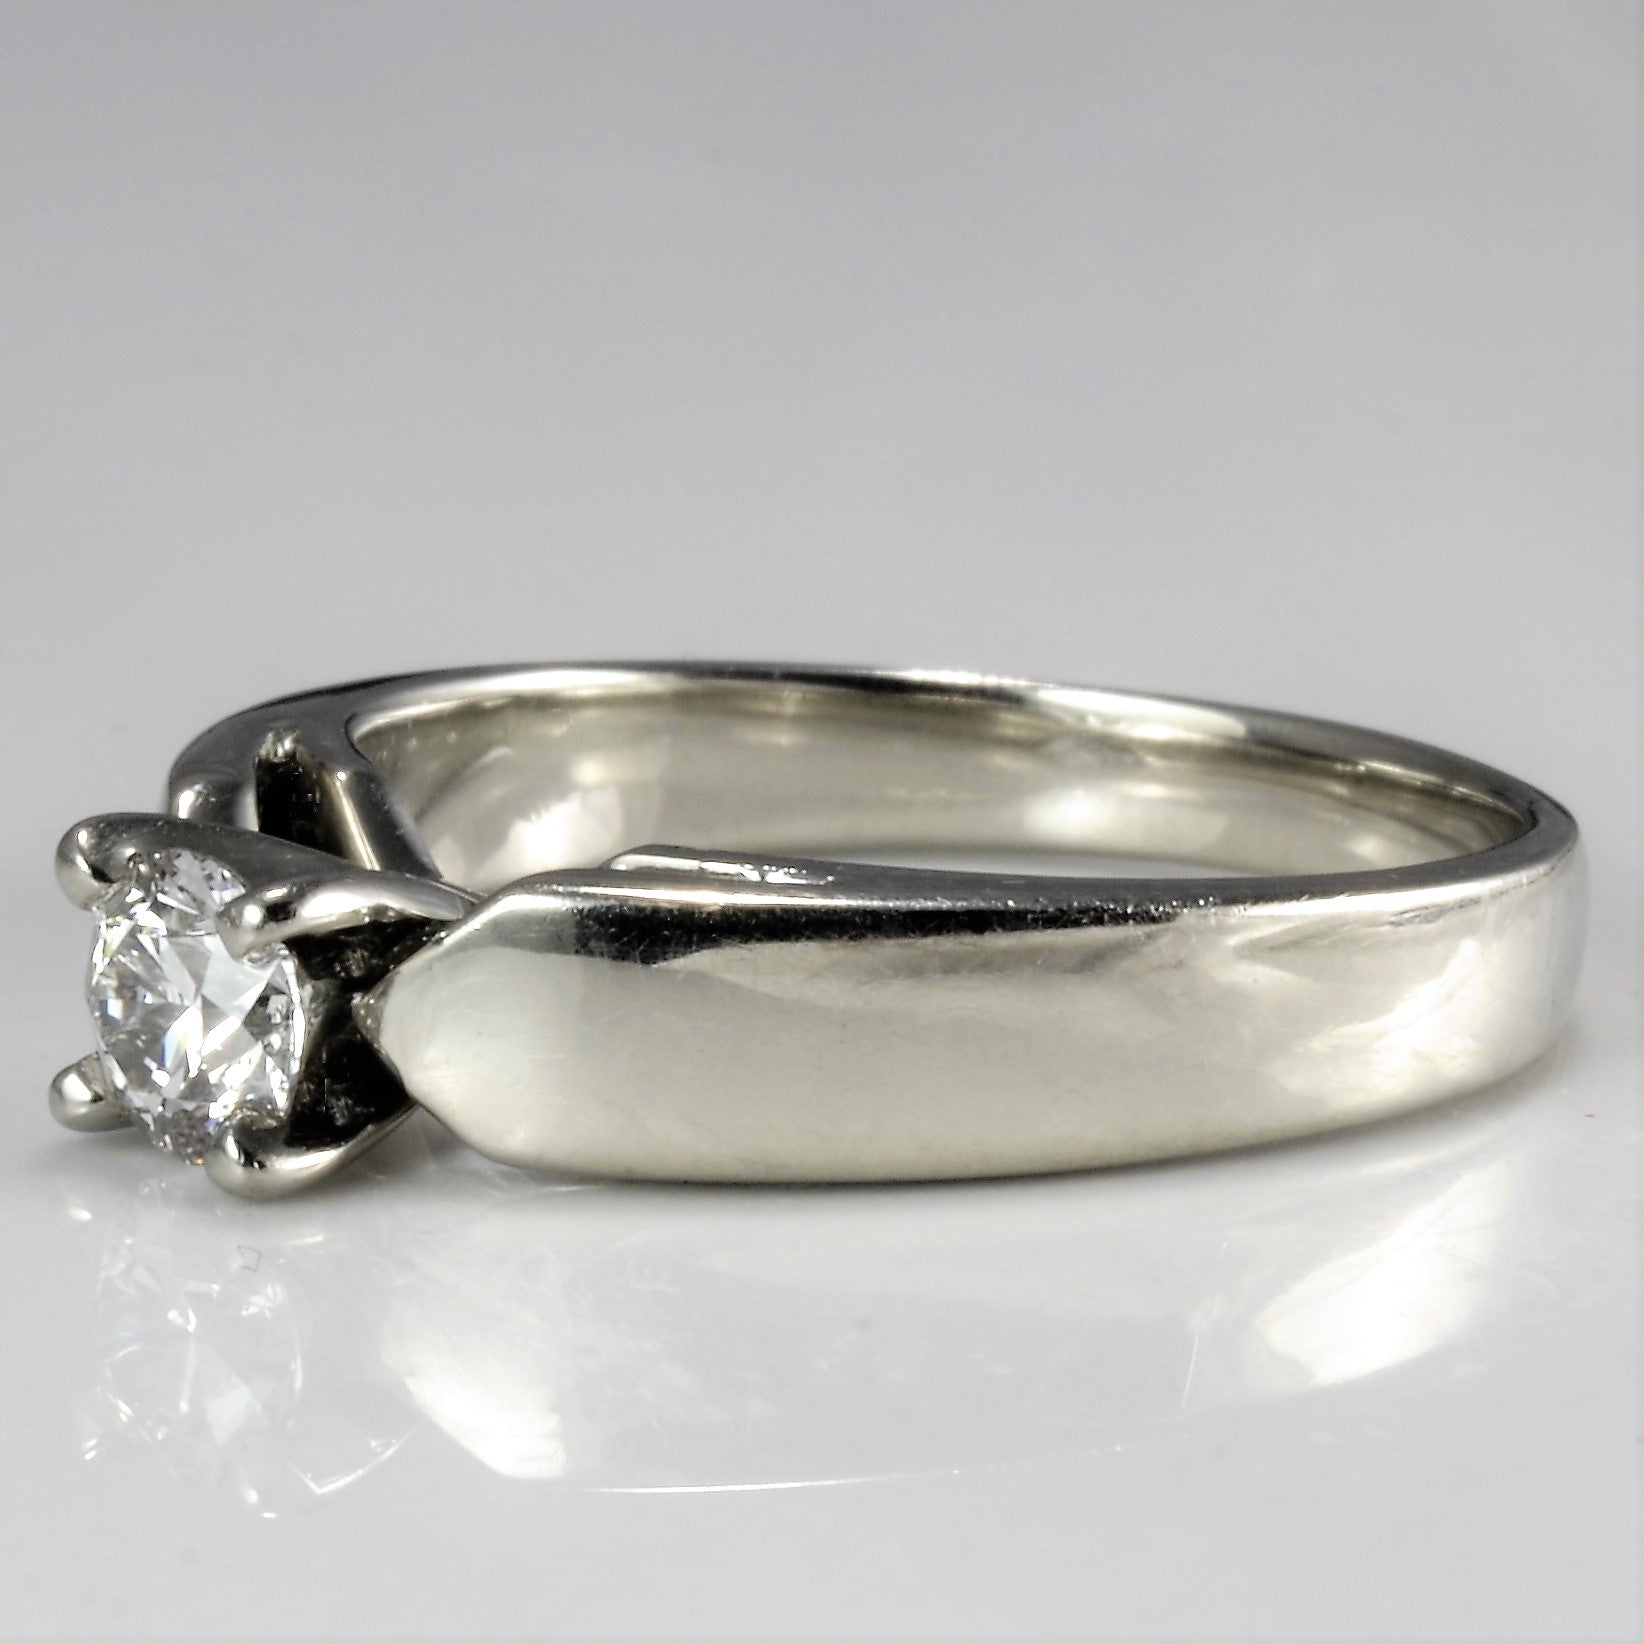 Tapered Solitaire Diamond Engagement Ring | 0.29 ct, SZ 6 |